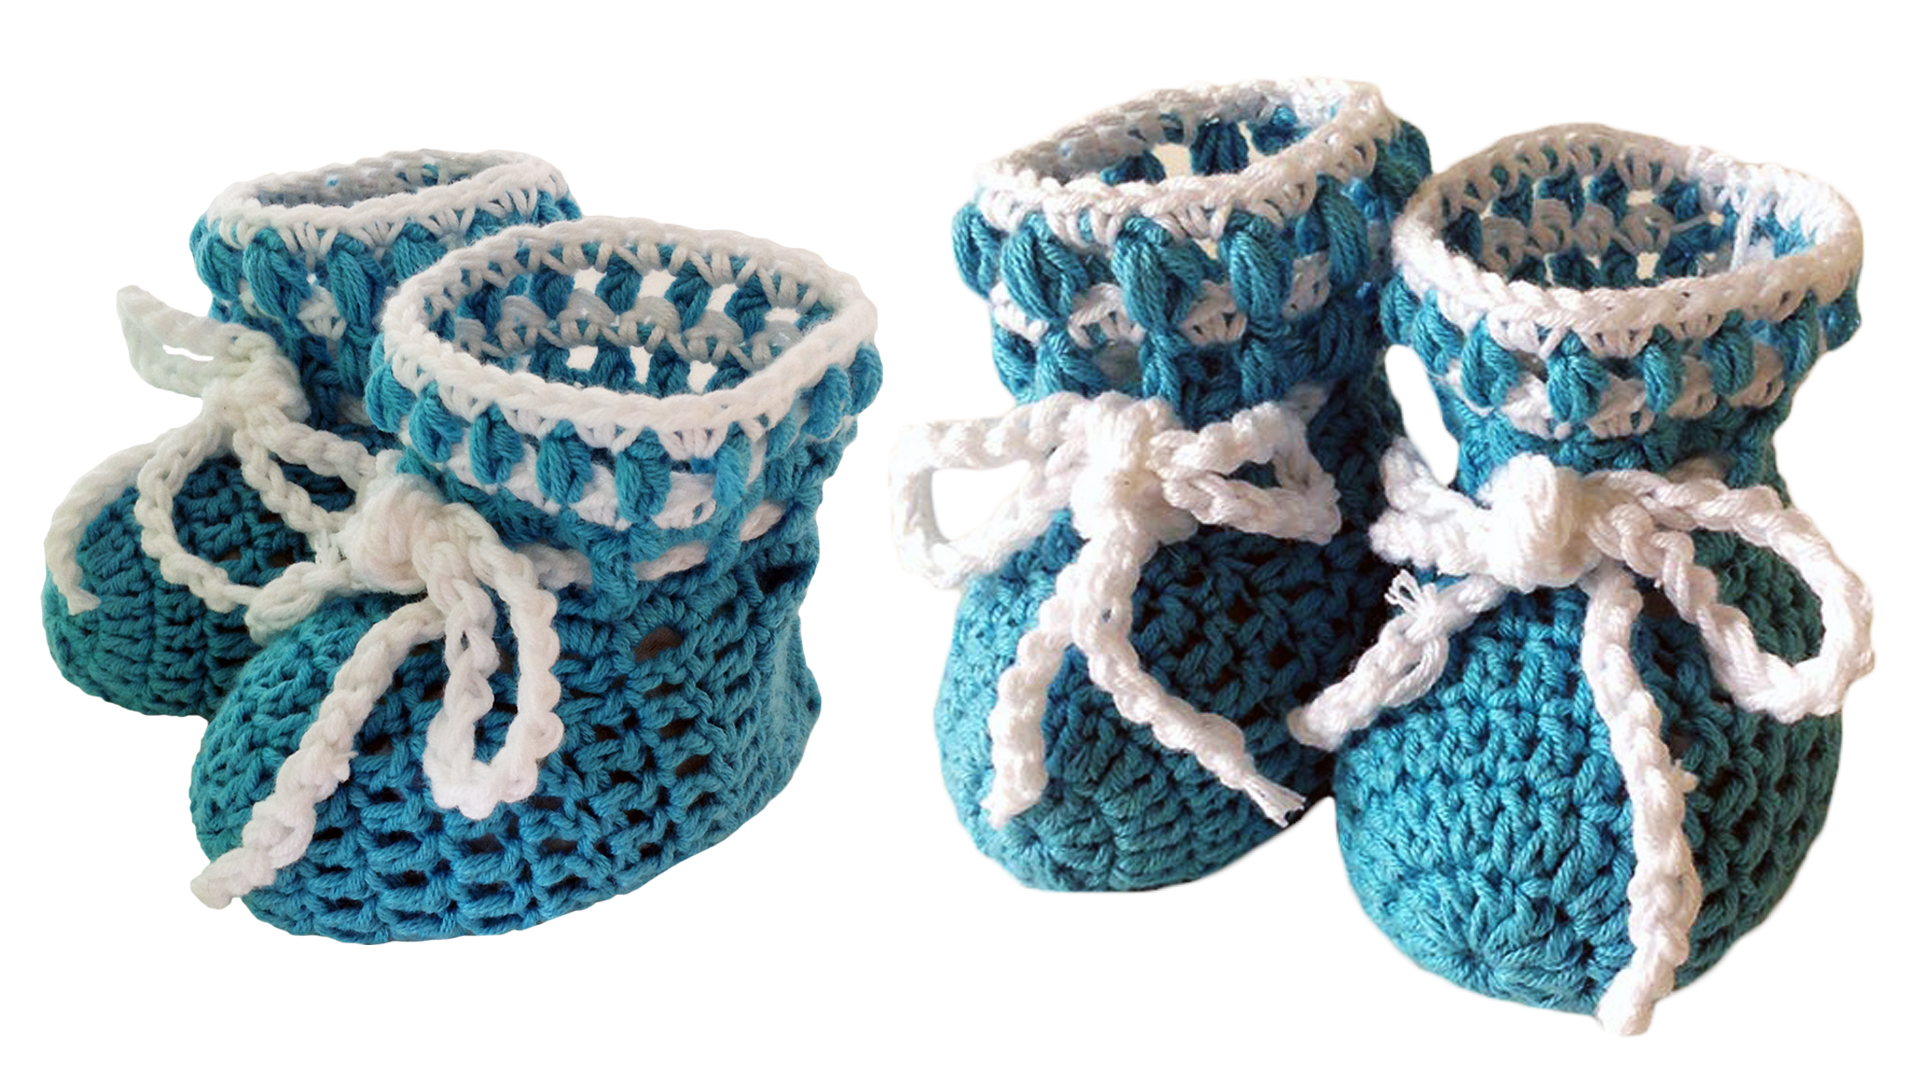 maggies-crochet-blue-booties-free-pattern-close-up